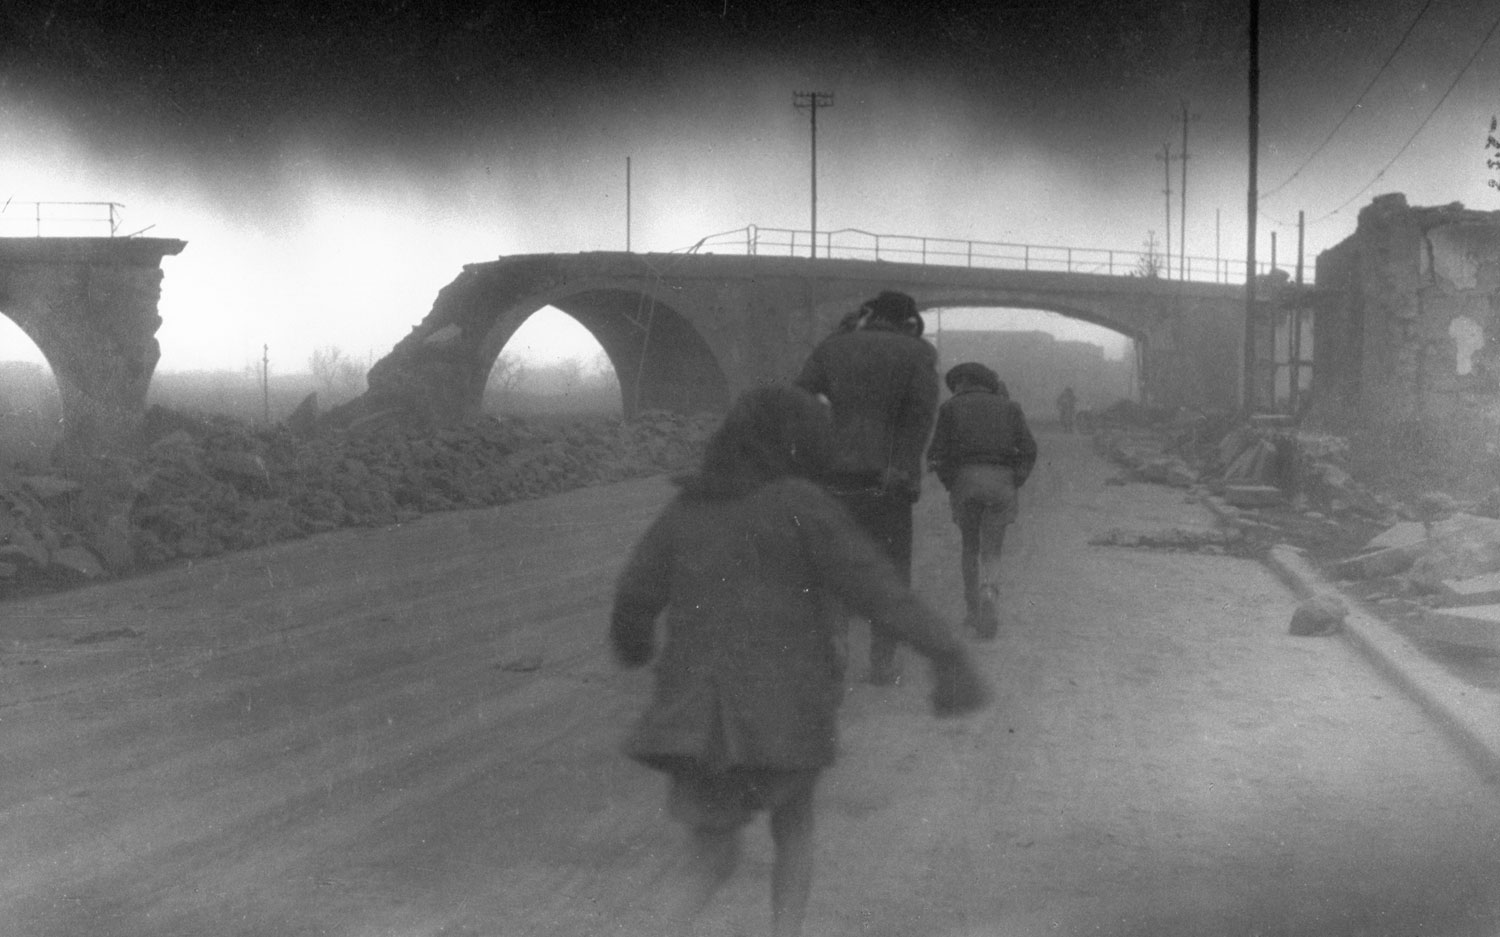 Refugees make their way through dust during the 1944 eruption of Mt. Vesuvius, Italy.